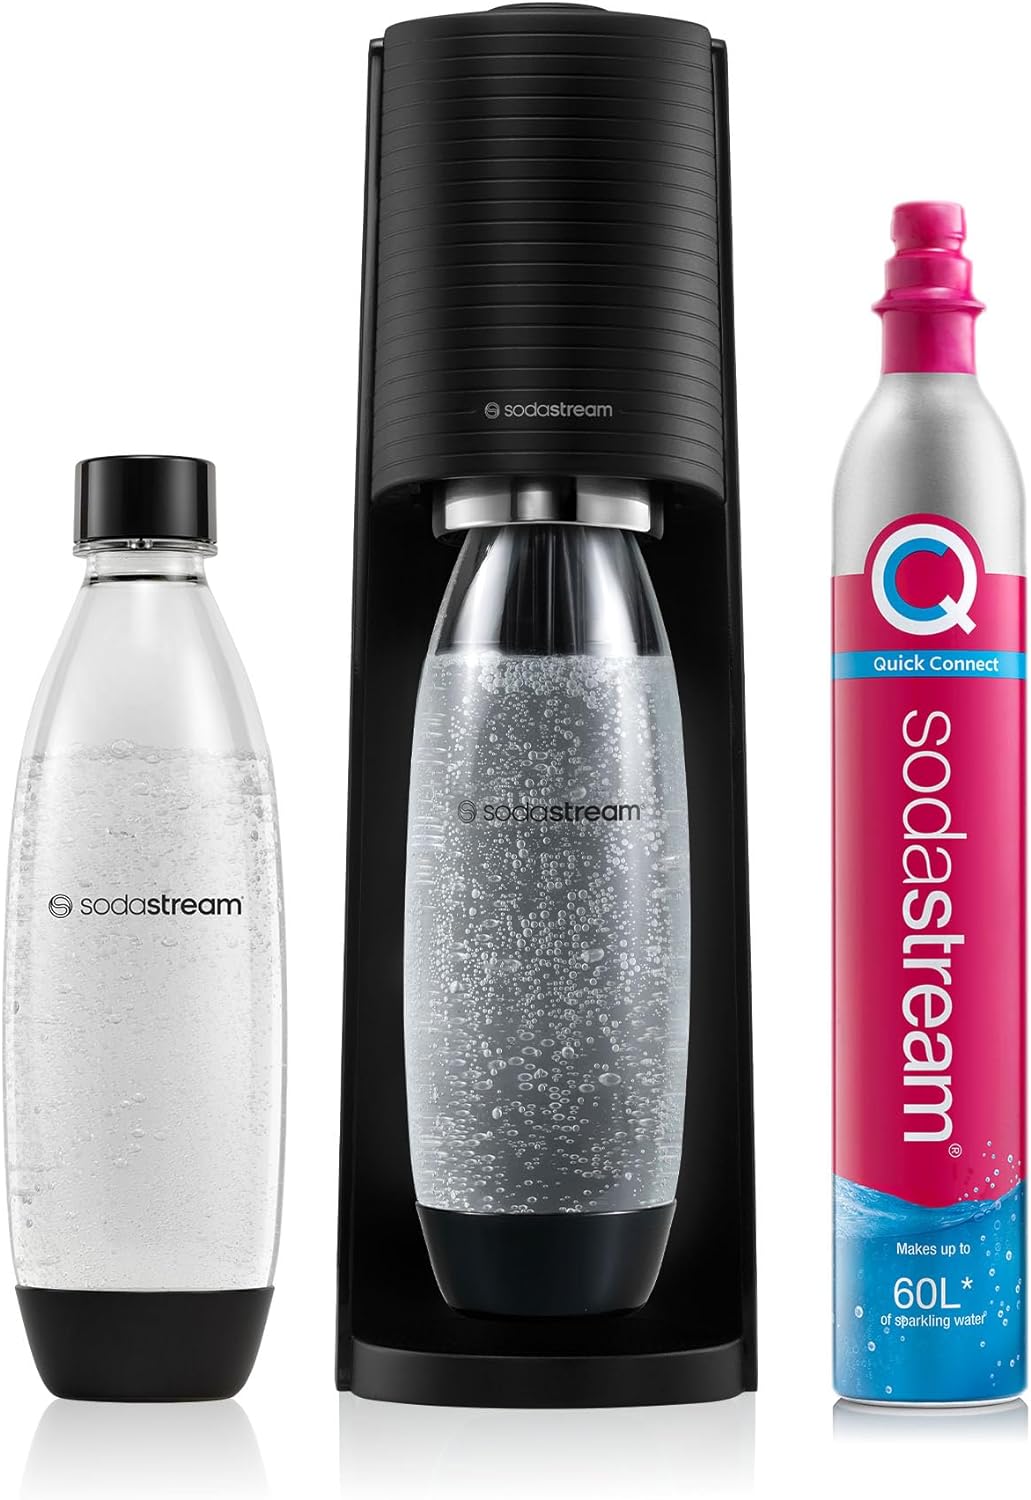 Save £51.21 on a SodaStream Terra fizzy water maker at Amazon